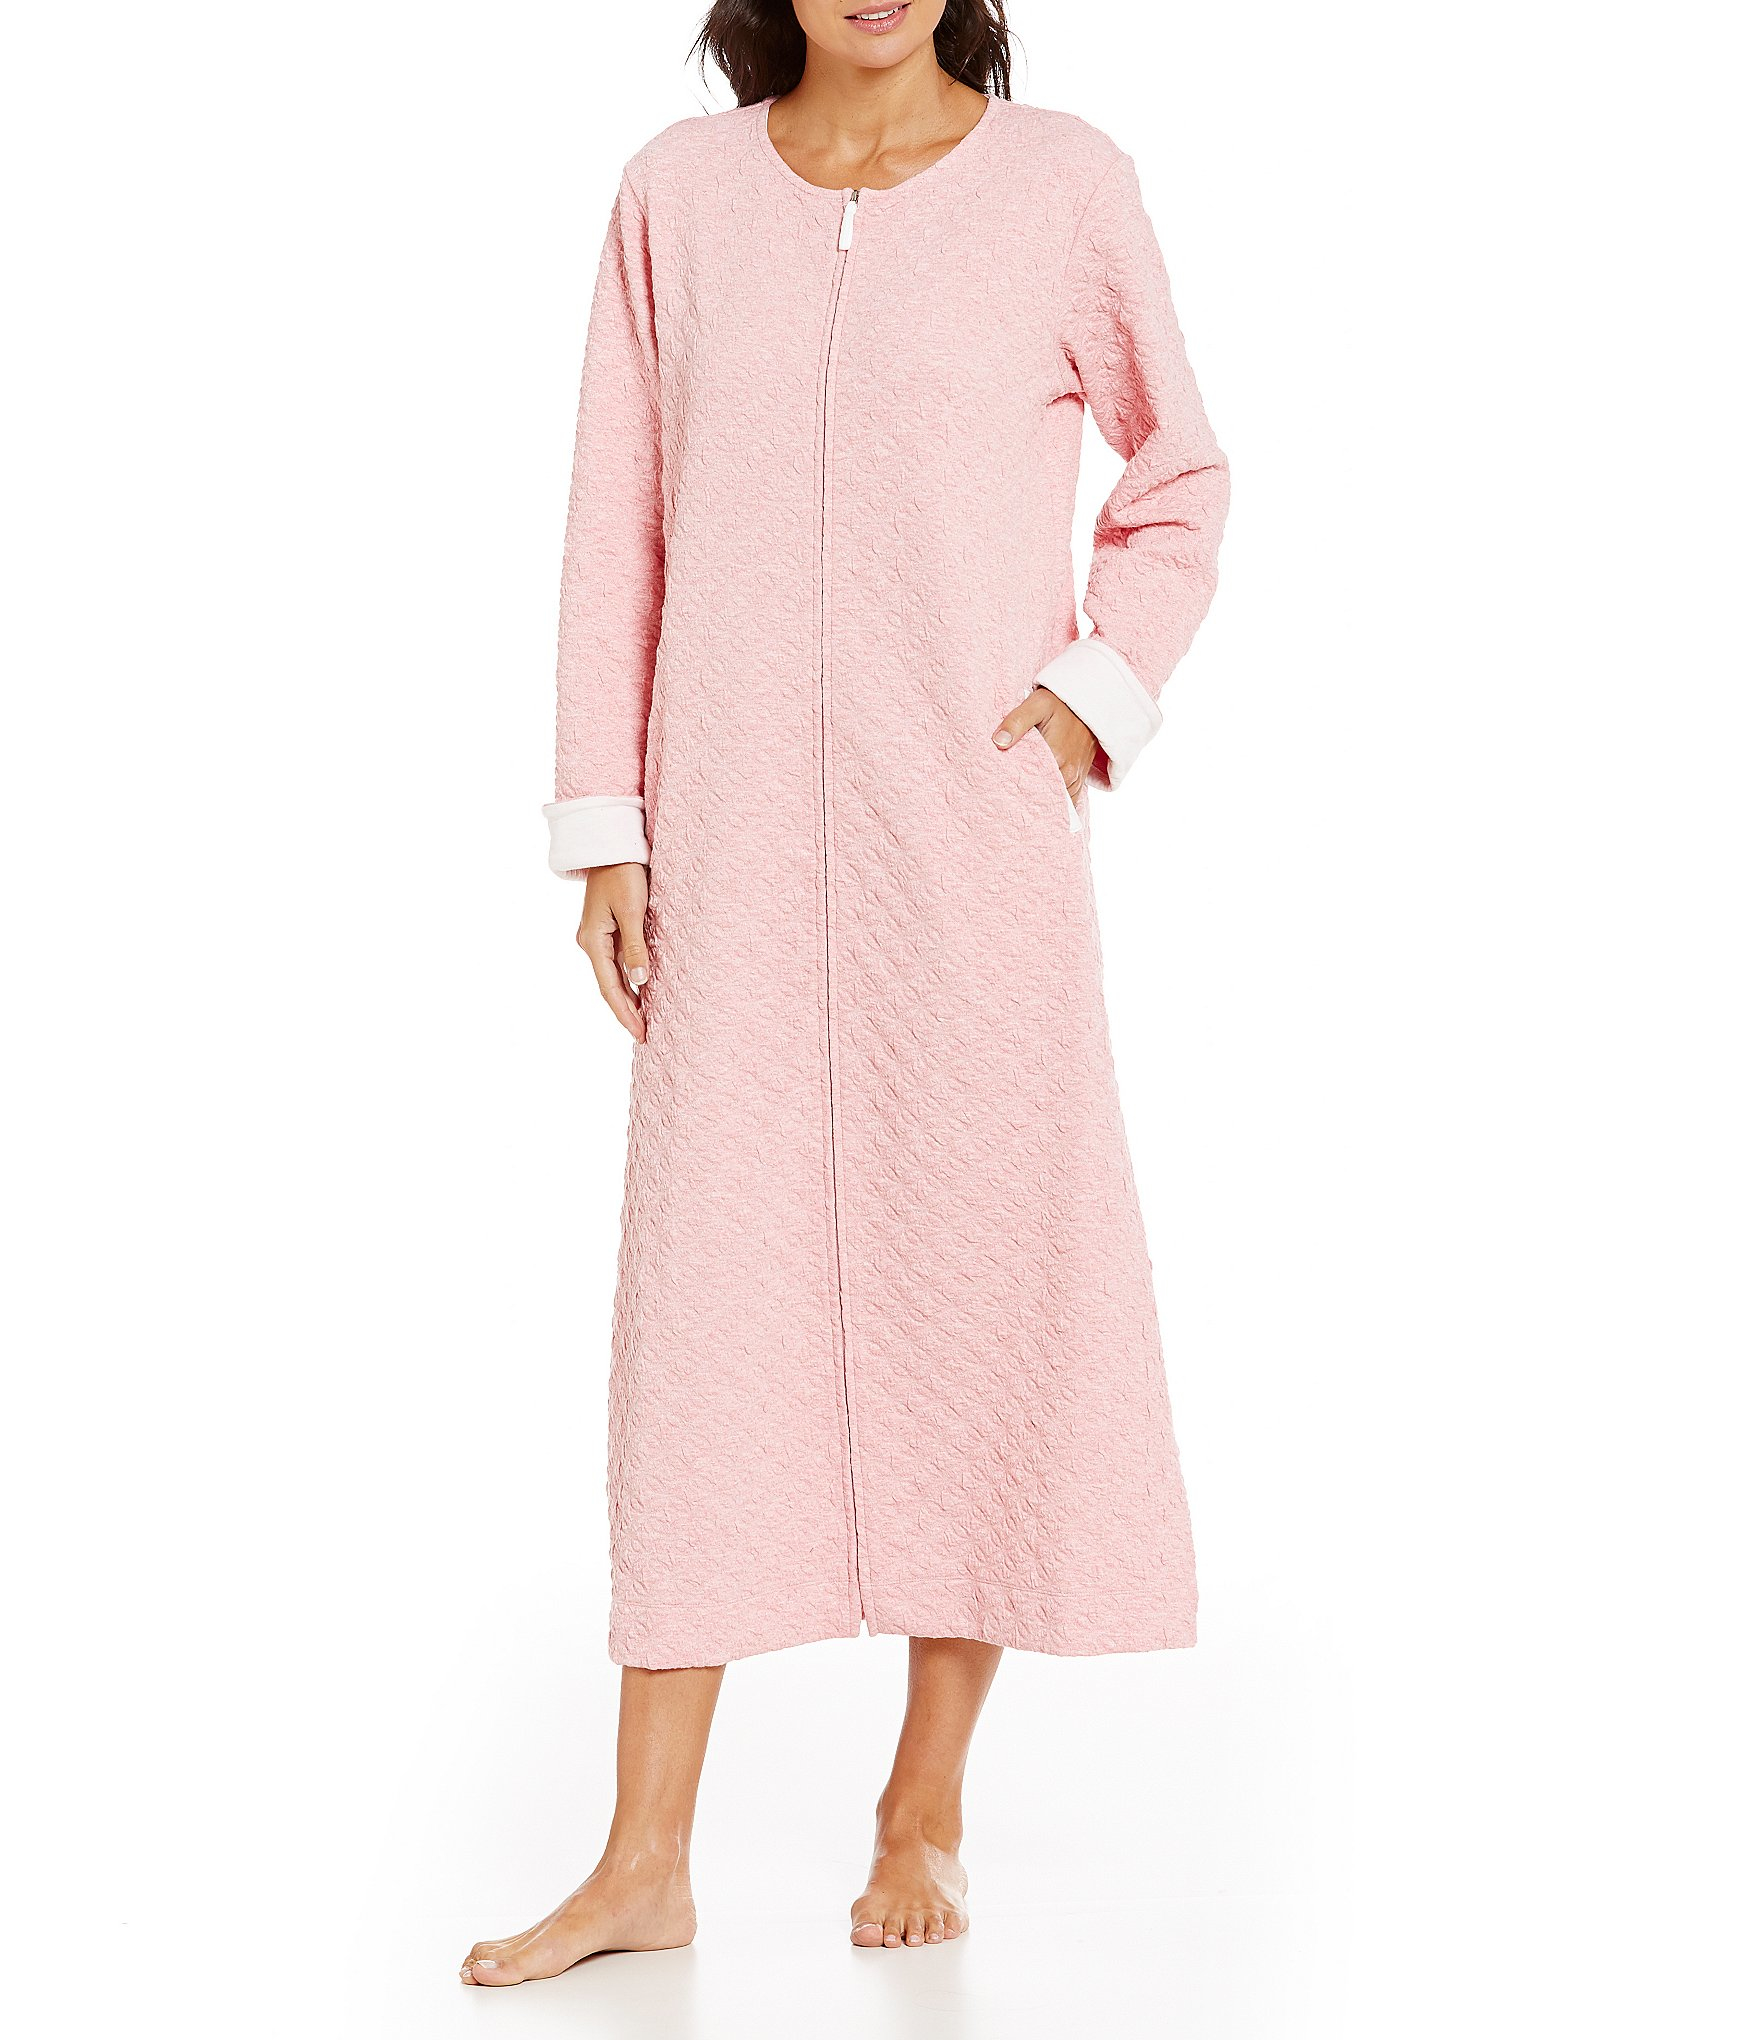 Carole hochman Plus Embossed Diamond-quilted Robe in Pink | Lyst